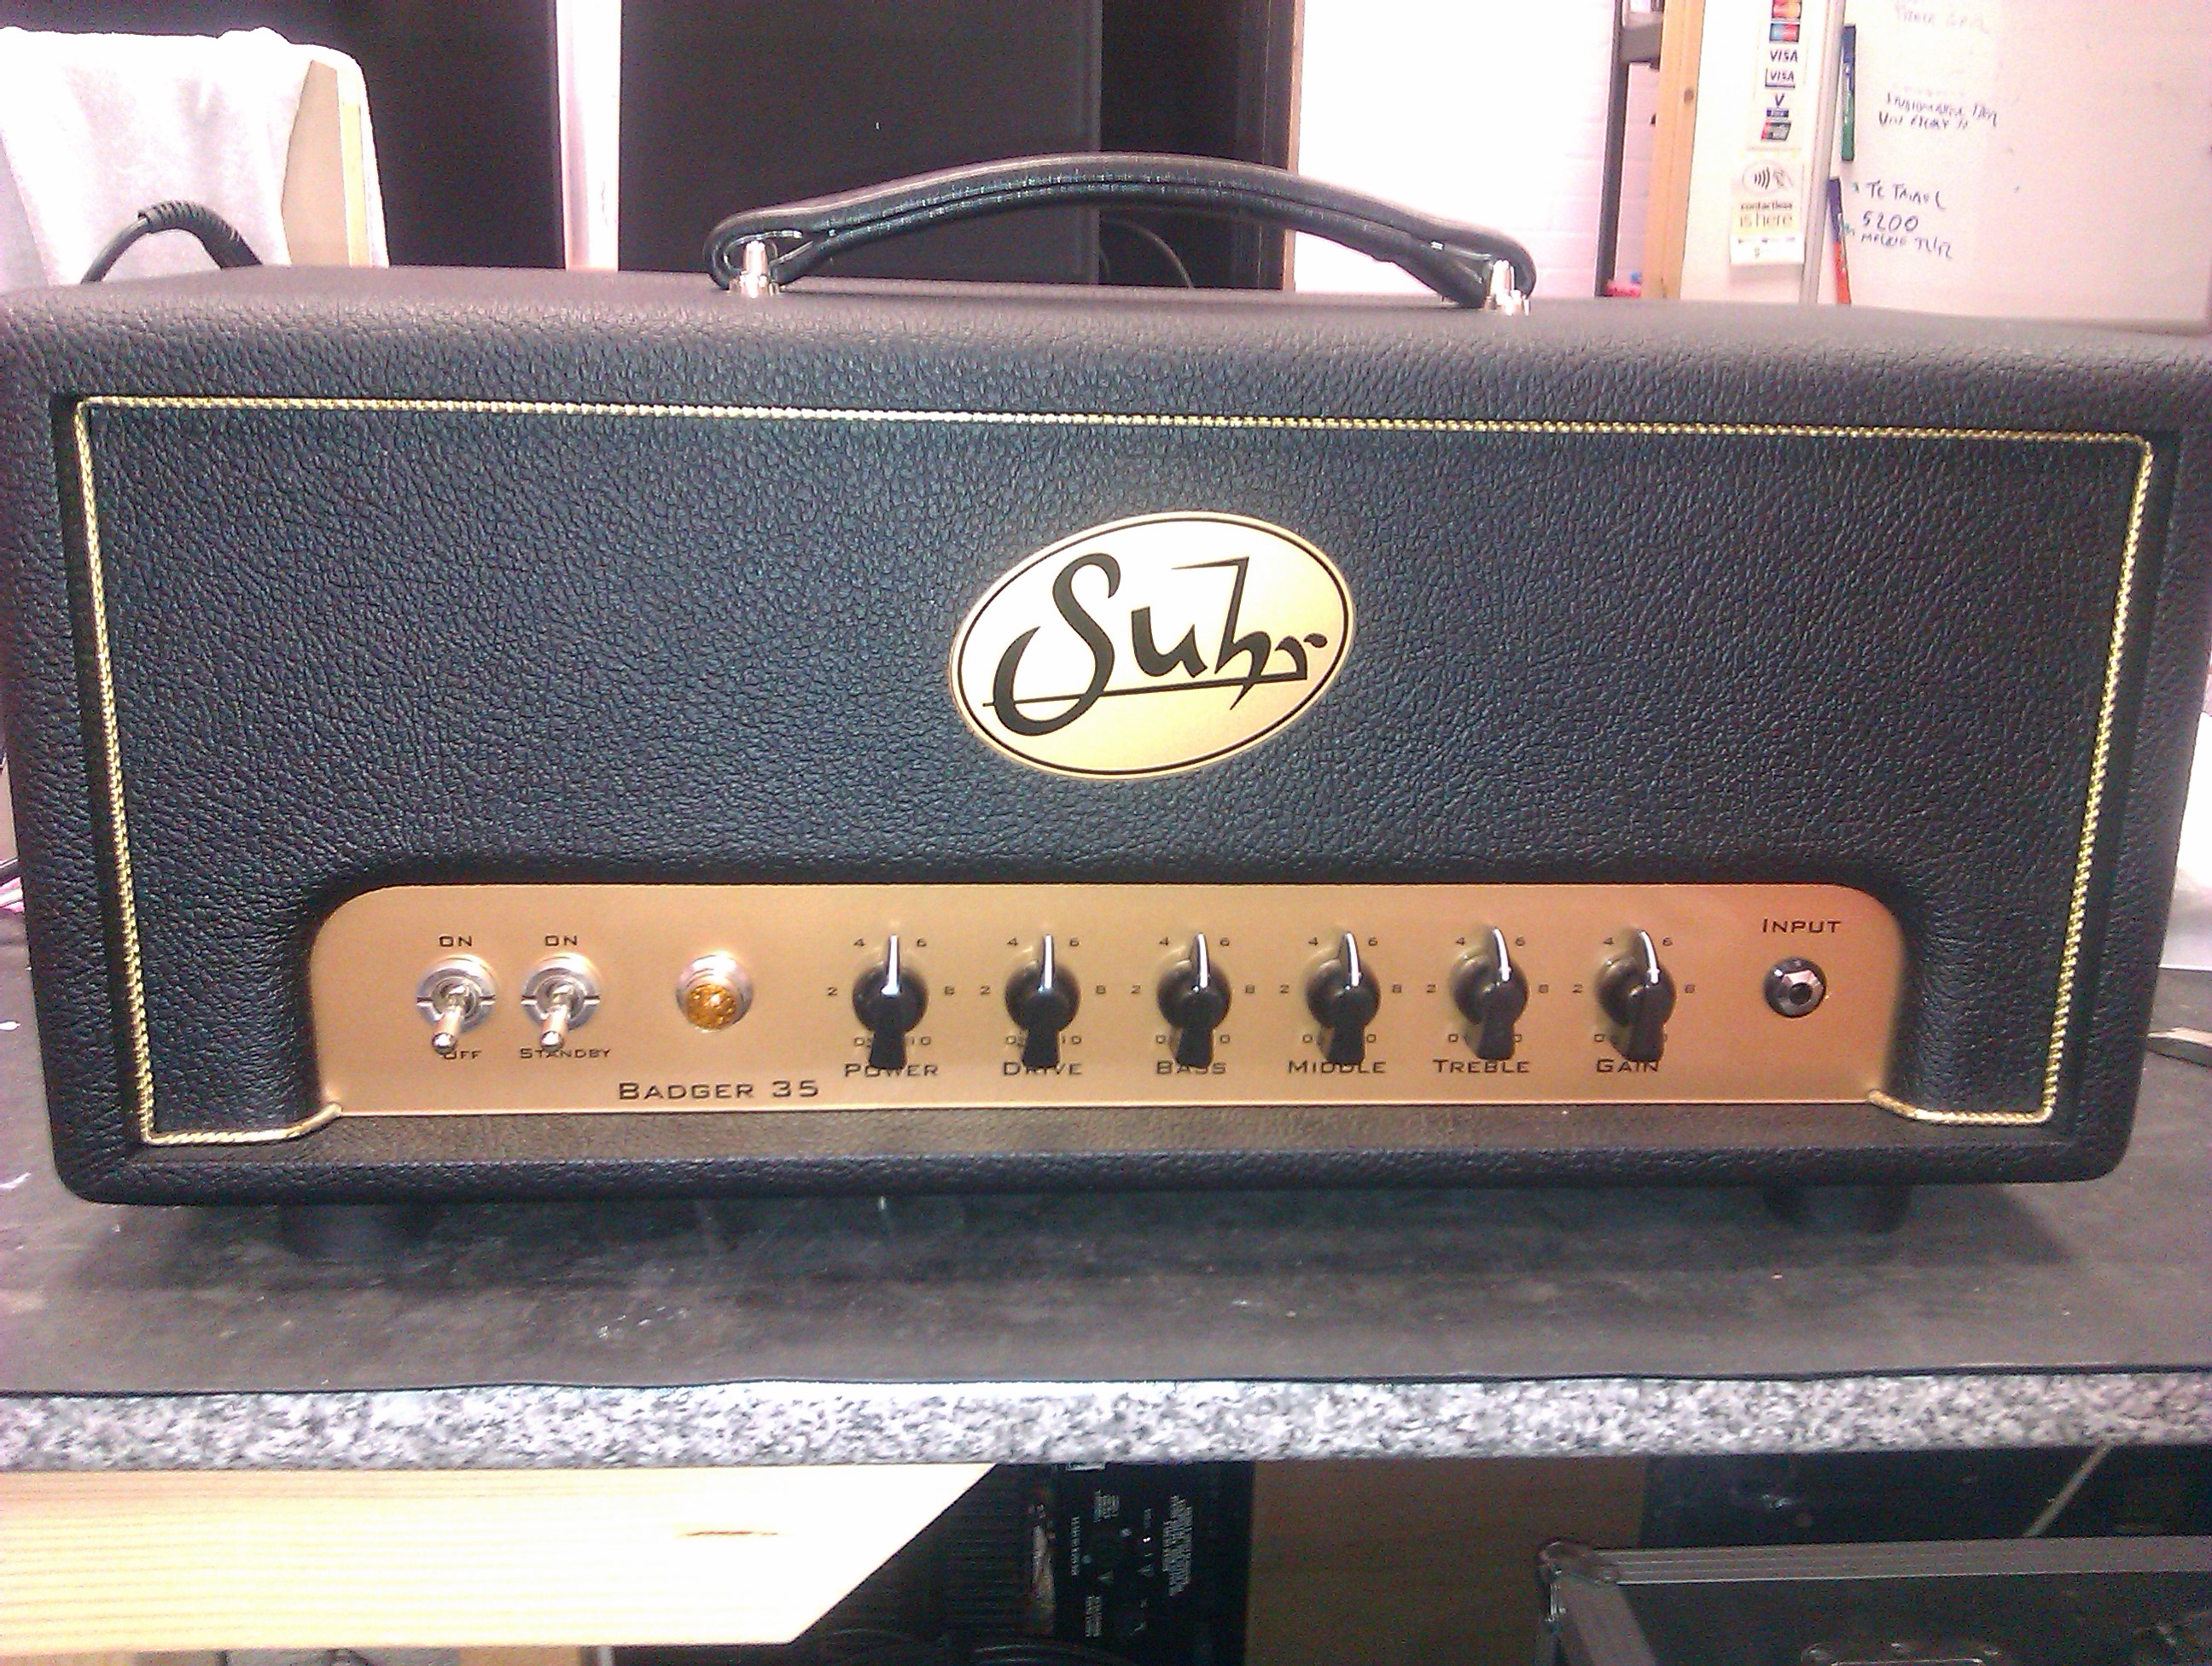 Great sounding amp from Suhr